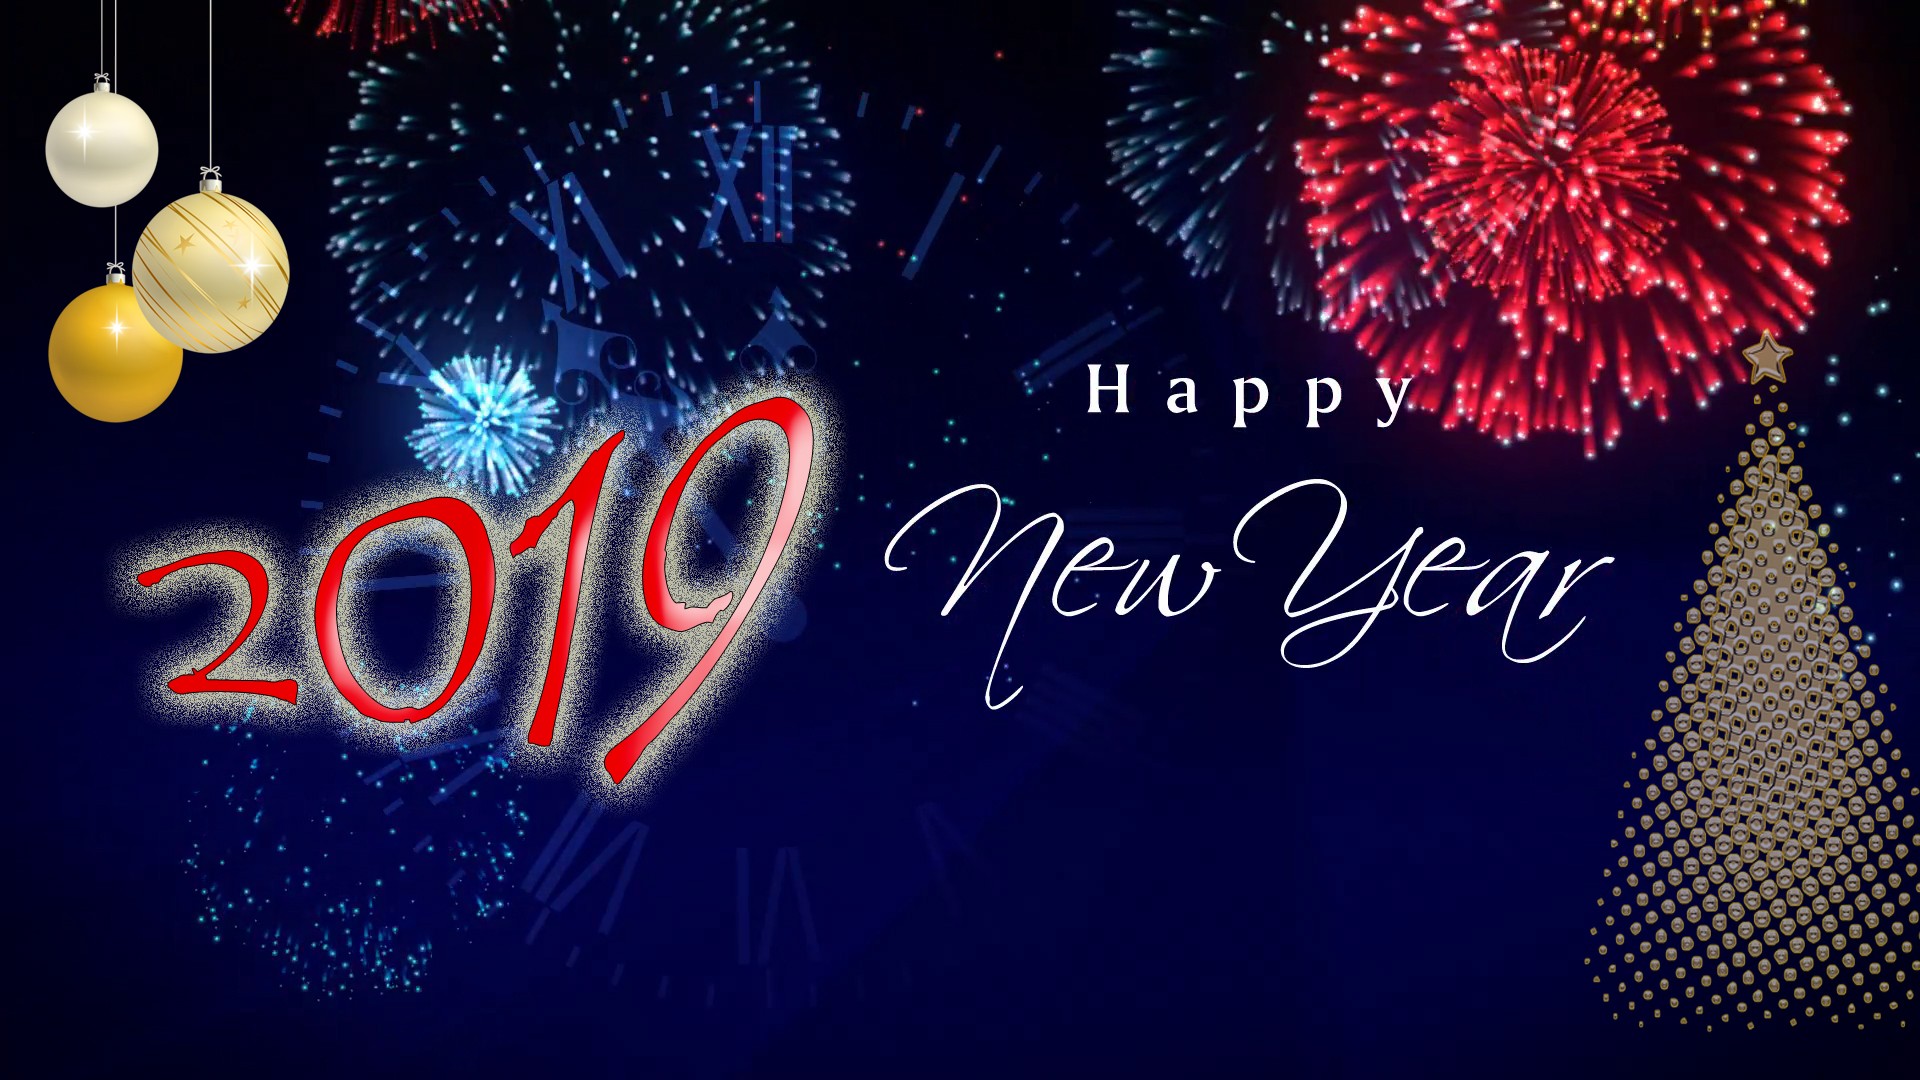 happy-new-year-2019-images-wishes-quotes-greetings-sms-for-photo-hd.jpg